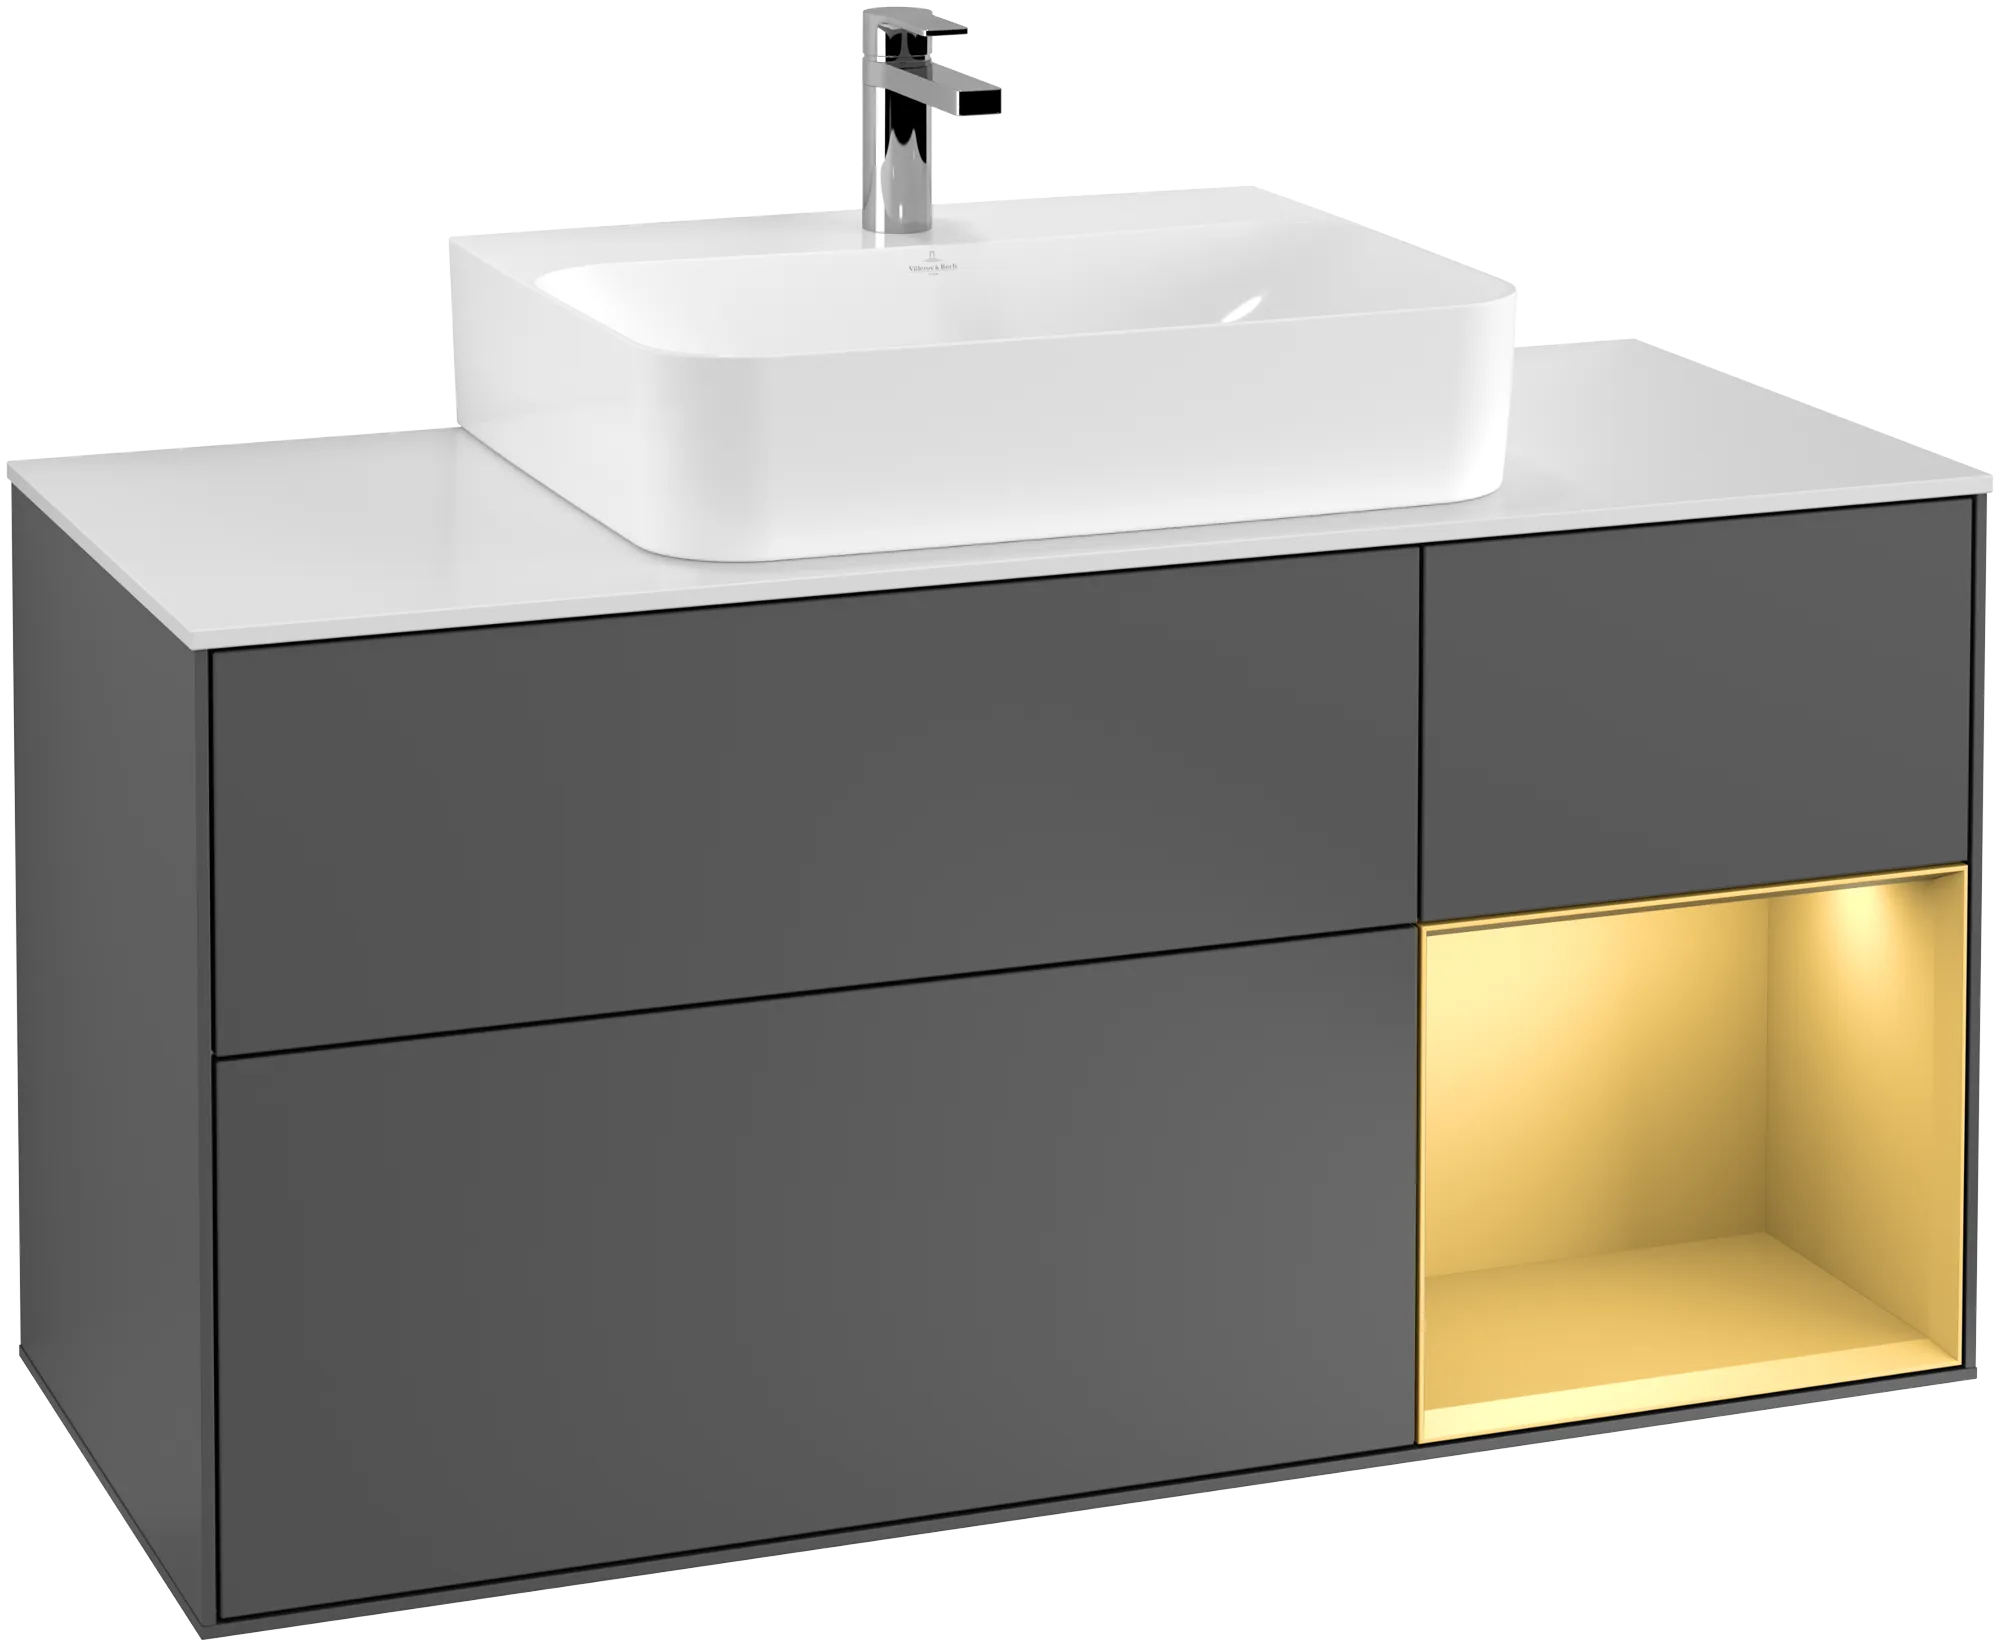 Obrázek VILLEROY BOCH Finion Vanity unit, with lighting, 3 pull-out compartments, 1200 x 603 x 501 mm, Anthracite Matt Lacquer / Gold Matt Lacquer / Glass White Matt #G171HFGK